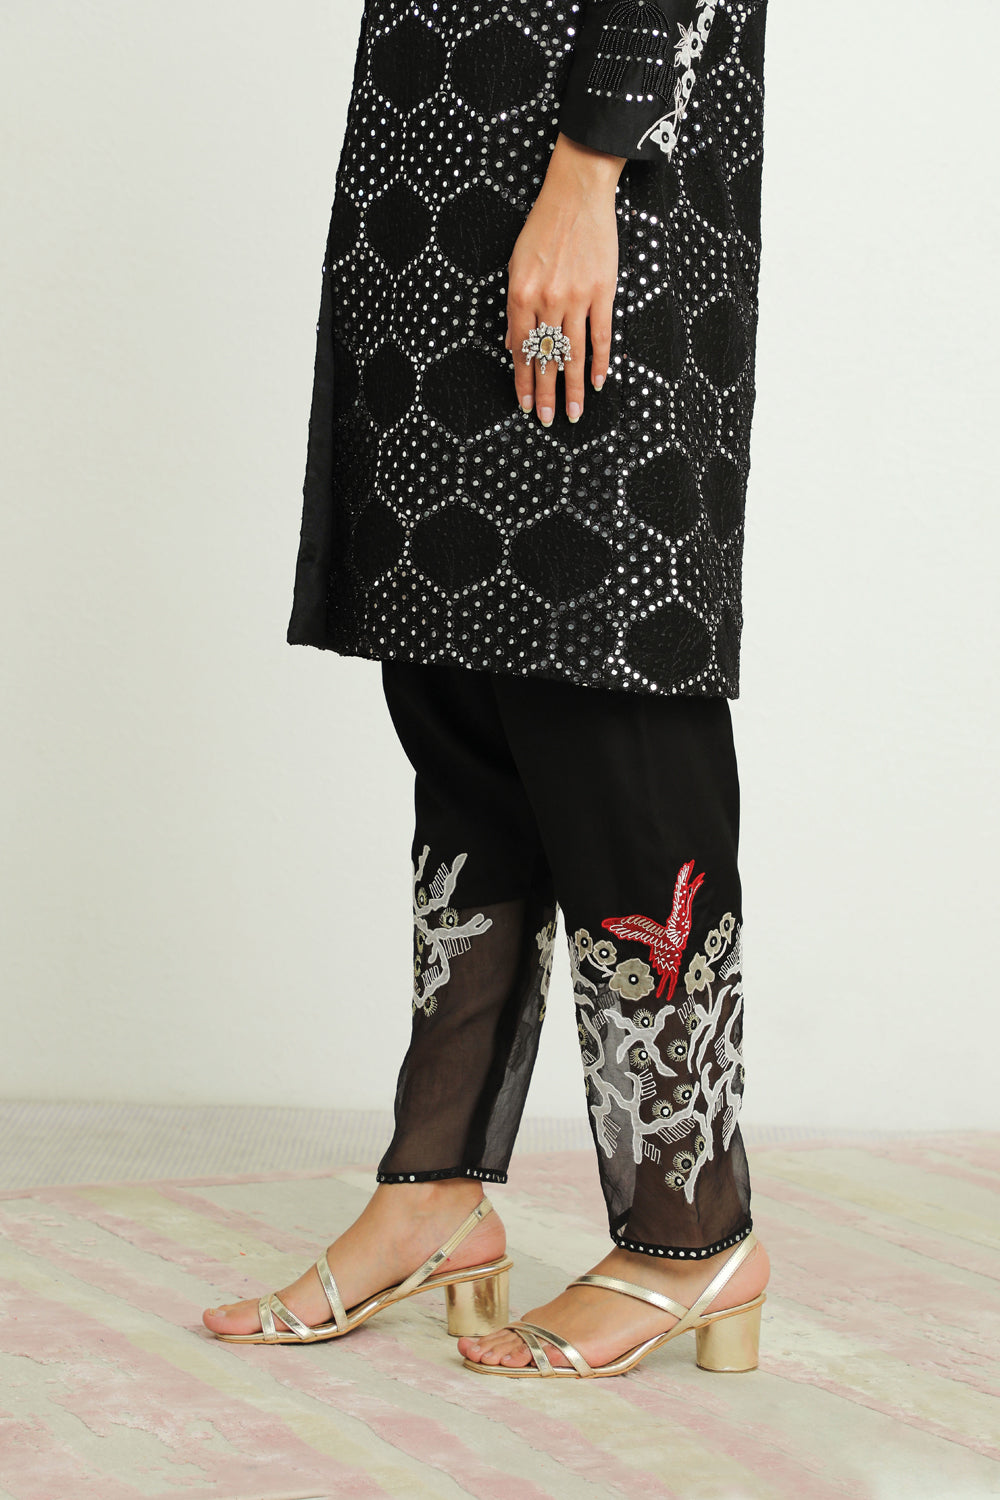 Modal Satin Dhoti with Embroidered Poncho